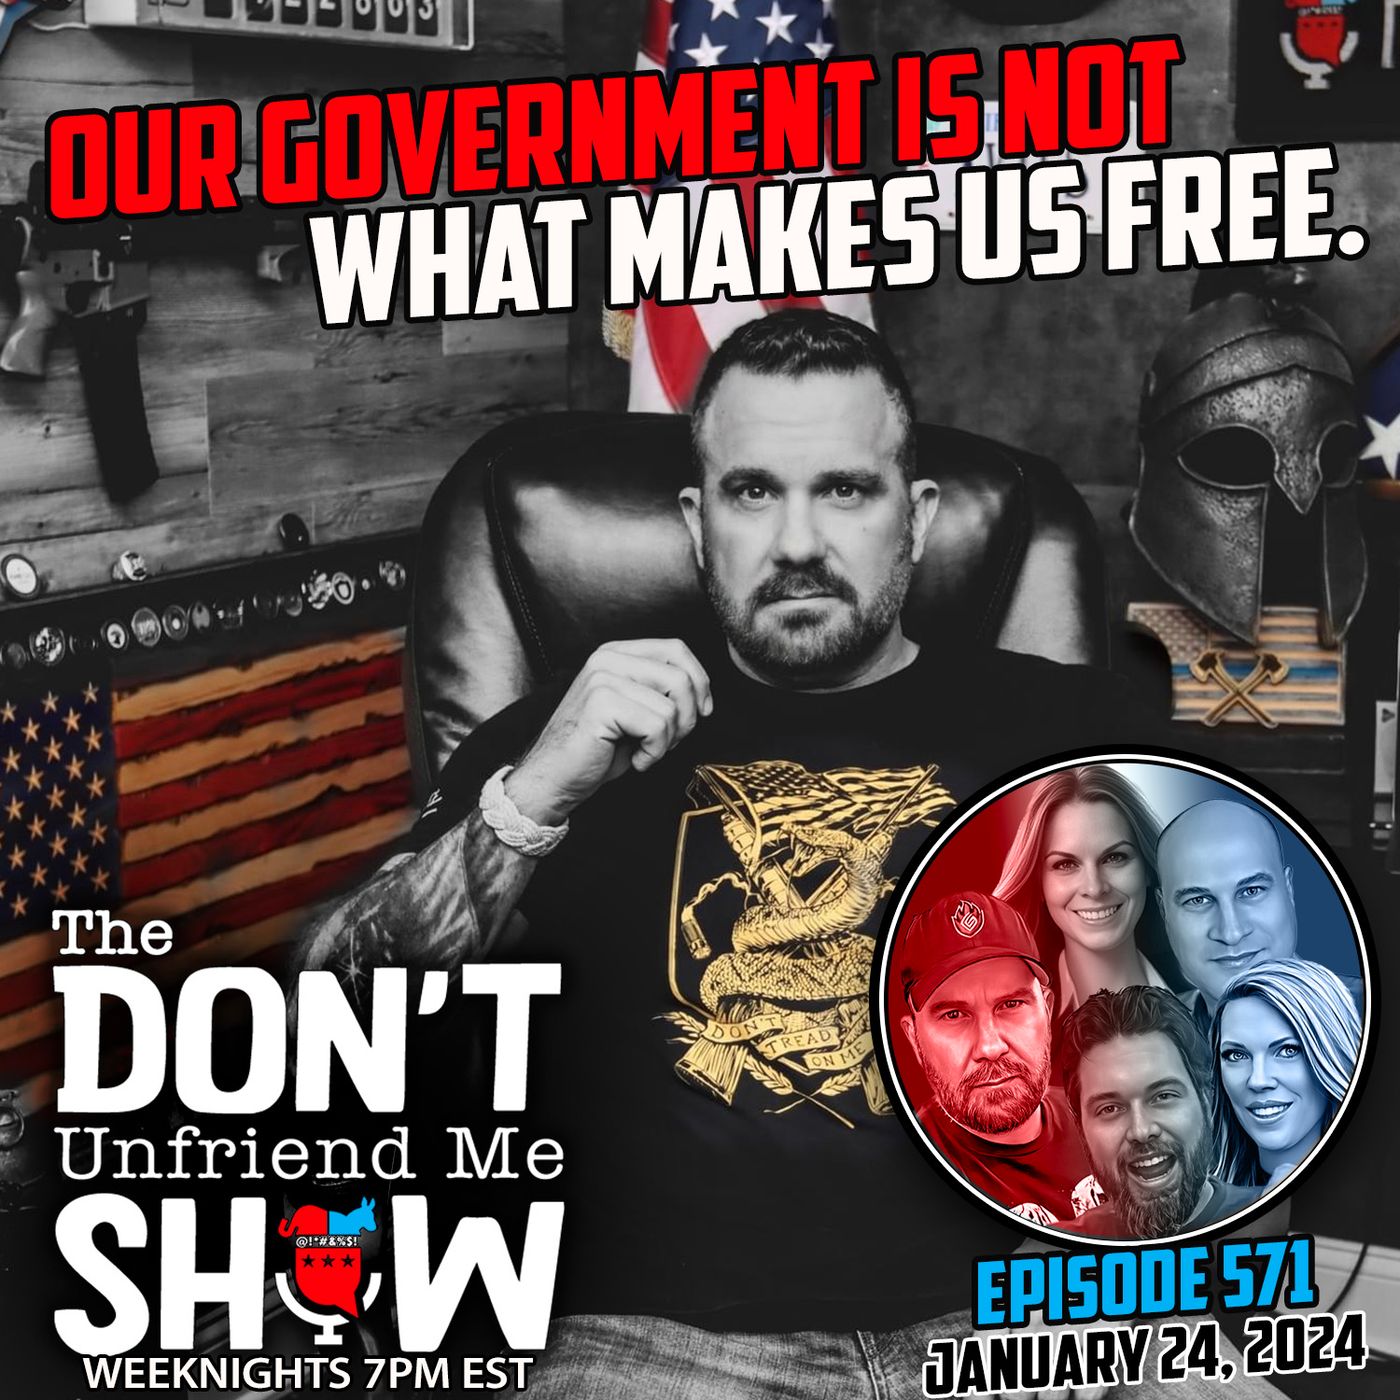 Our Government Doesn't Make Us Free